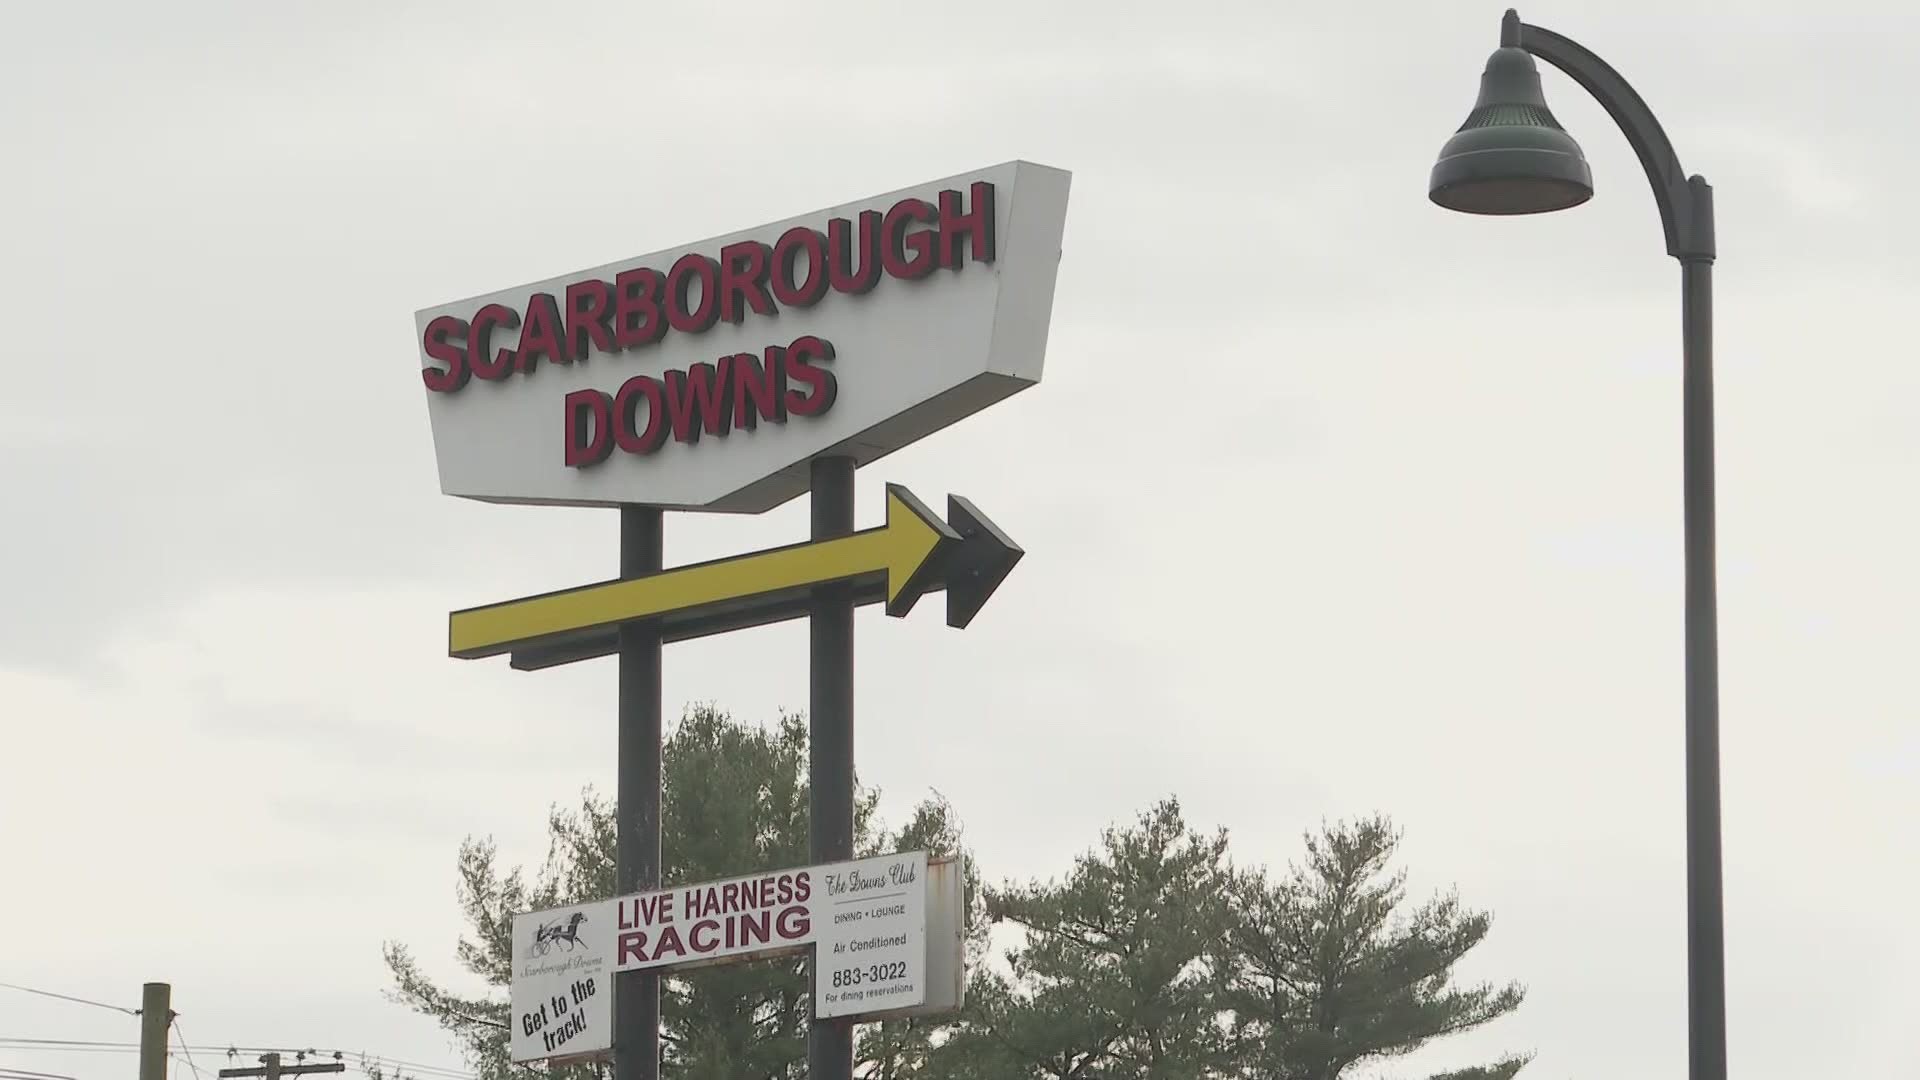 Saturday was the last day of racing at Scarborough Downs. The property was purchased two years ago and will turn into a multi-use community.